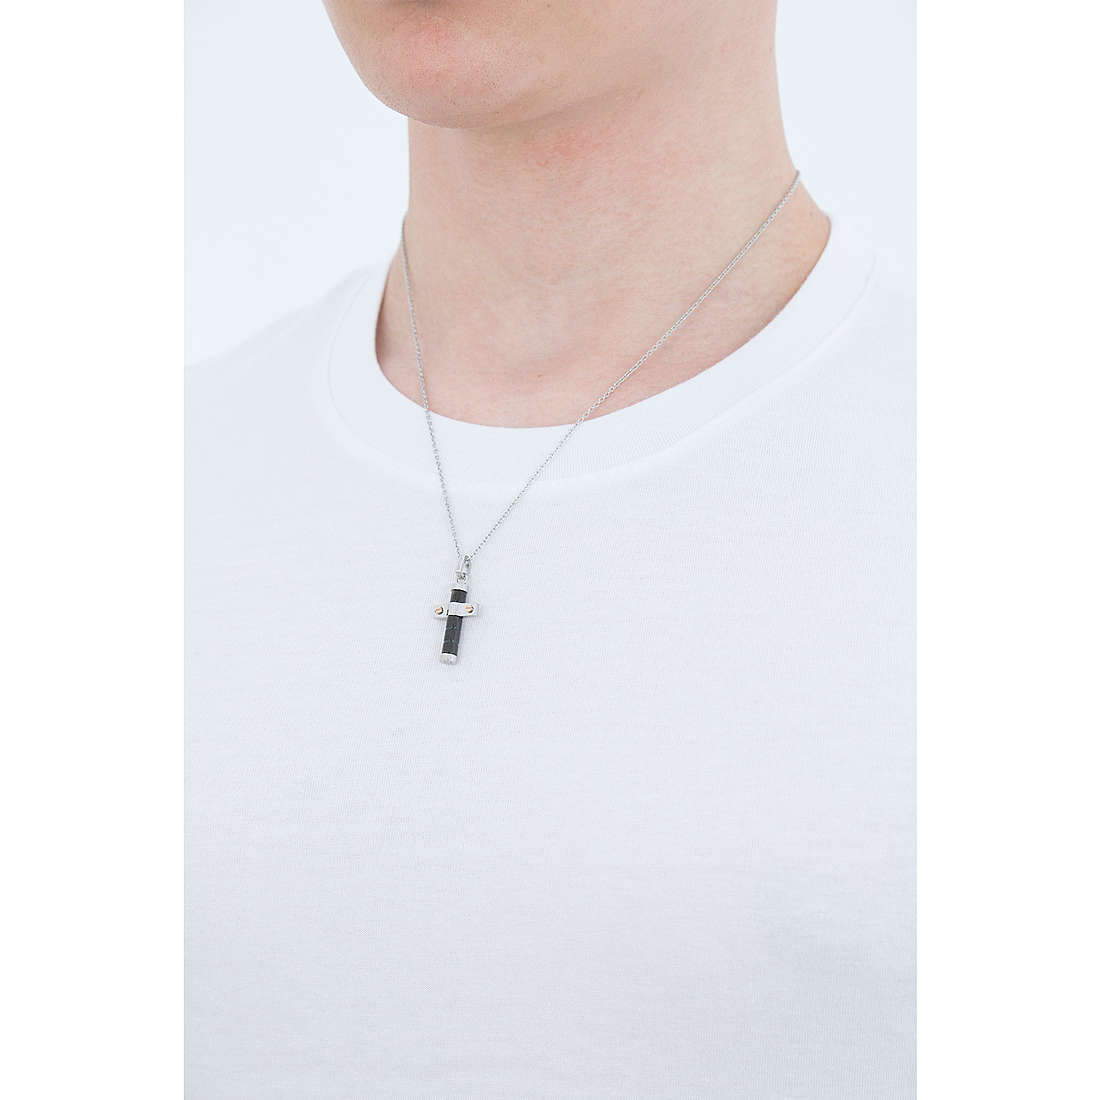 Sector necklaces Spirit man SZQ15 wearing